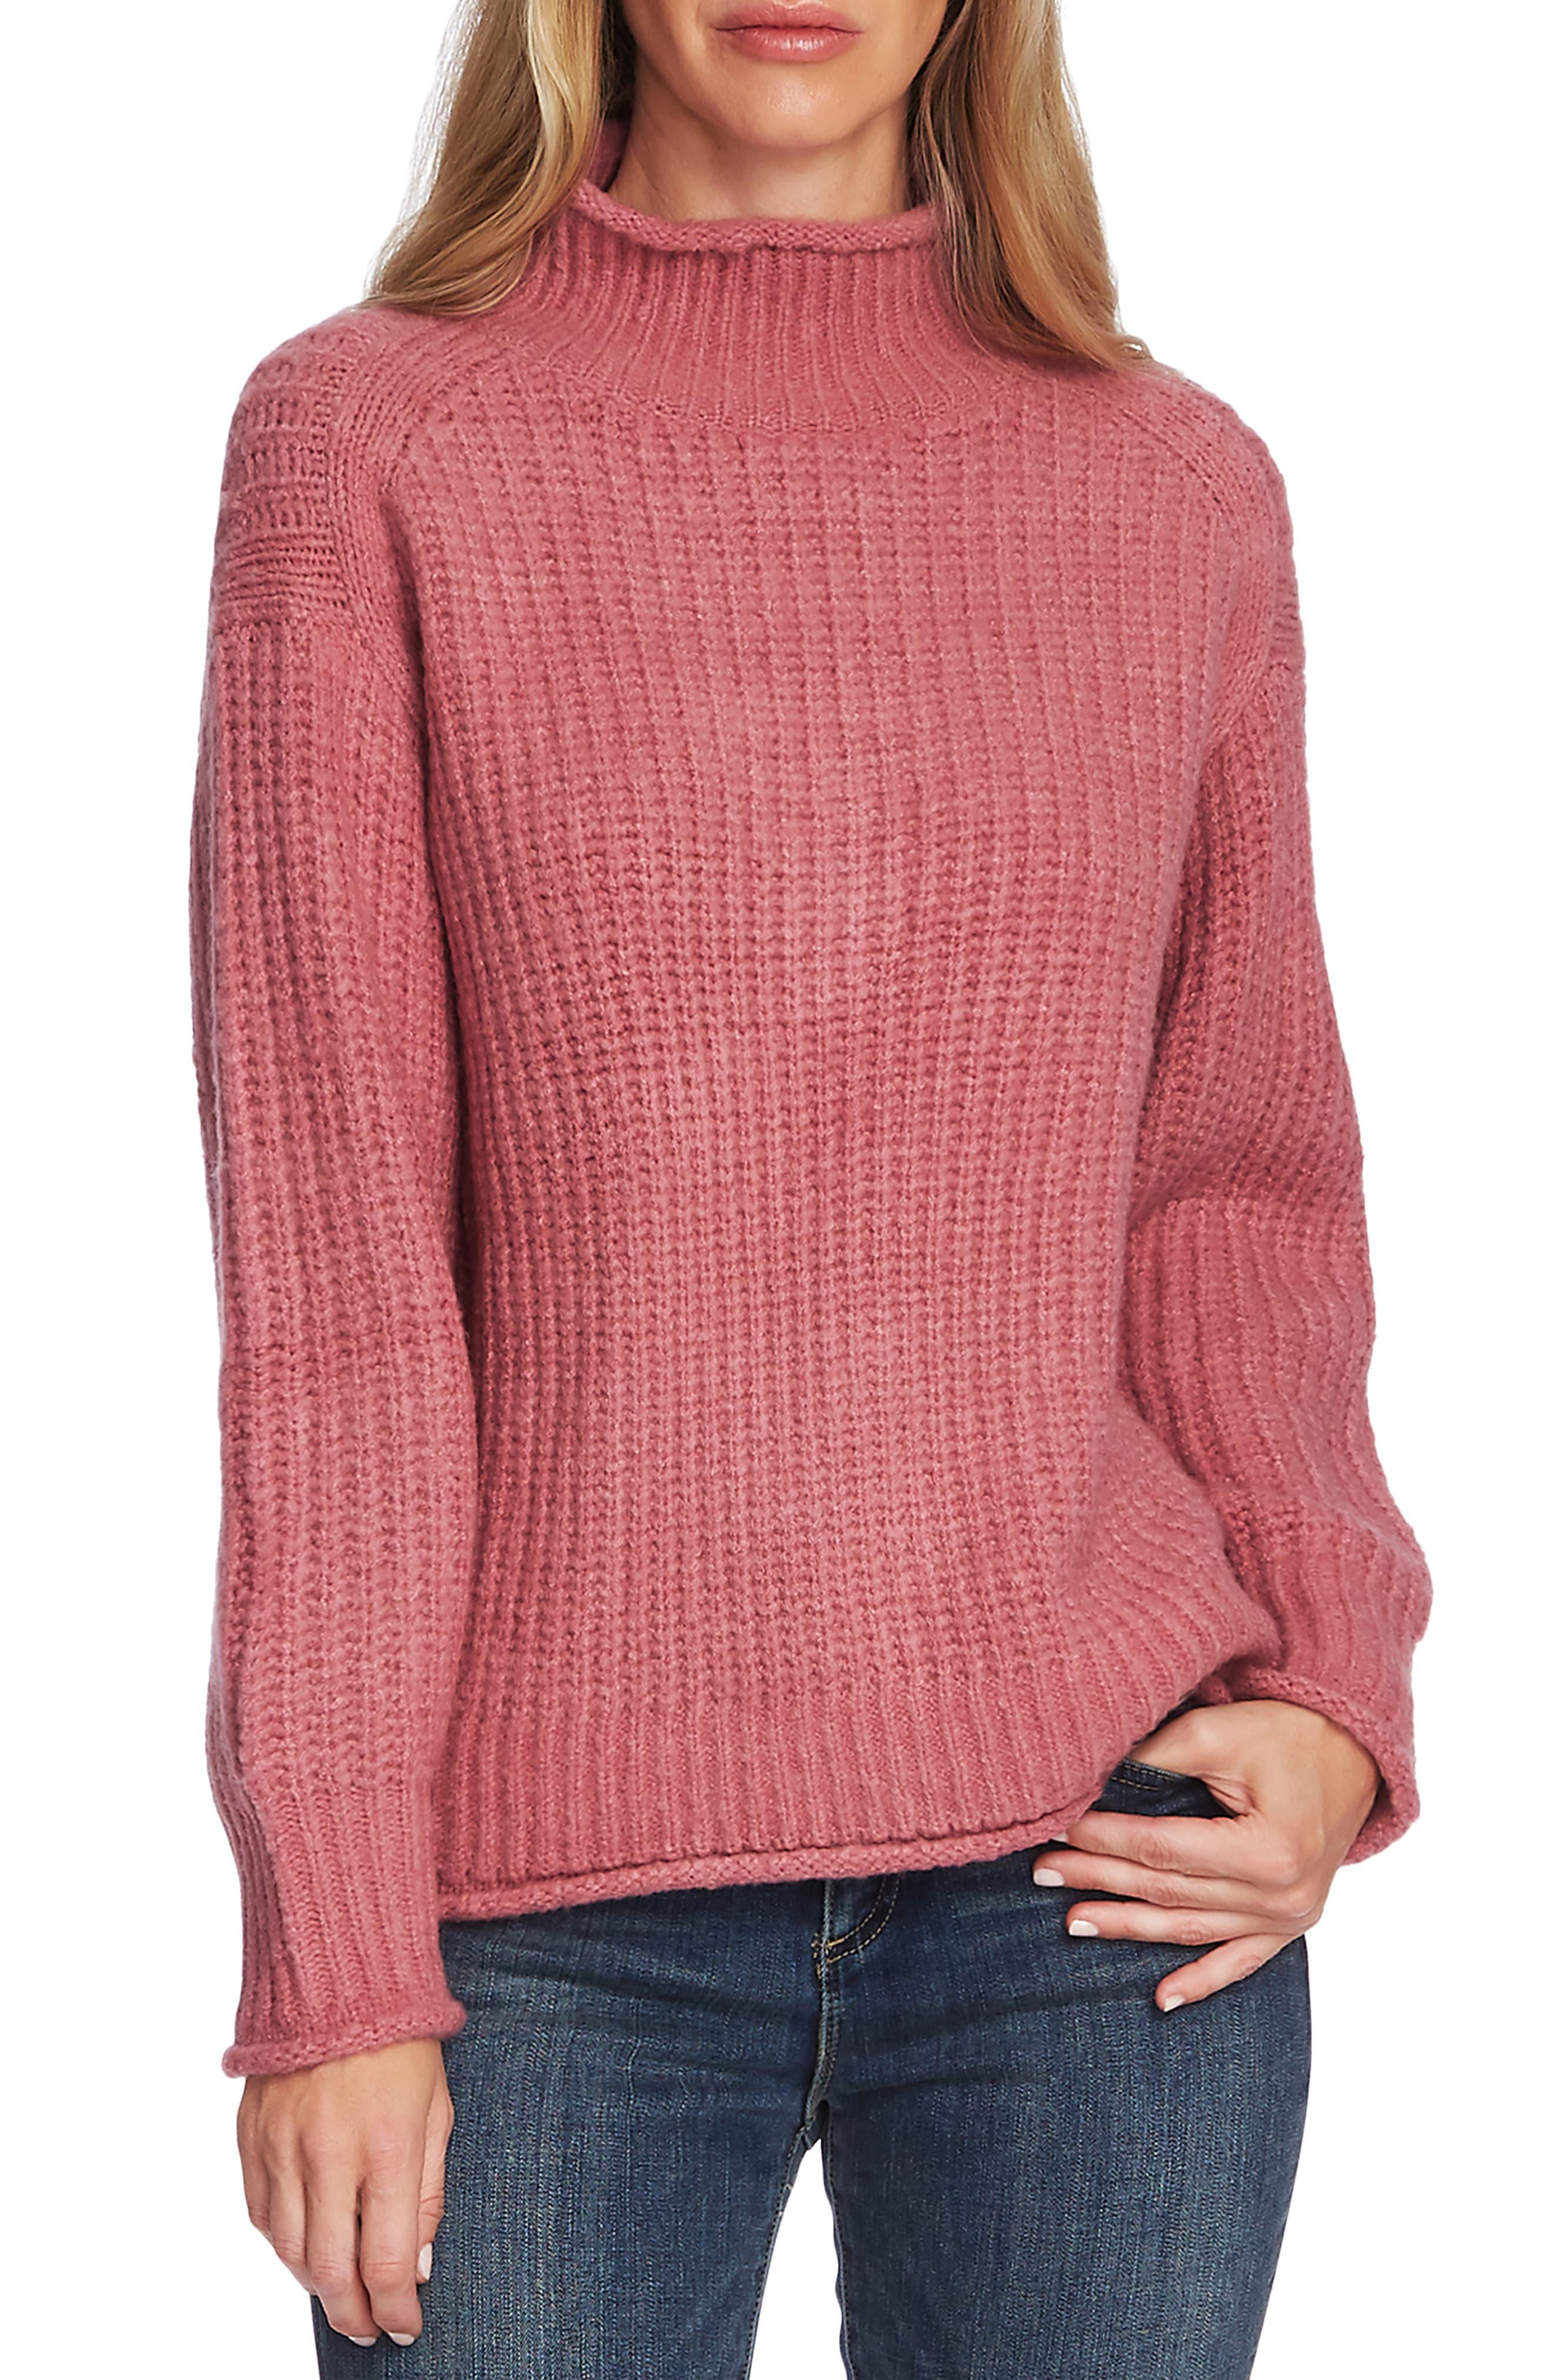 Vince Camuto Mock Neck Sweater in Pink - Lyst